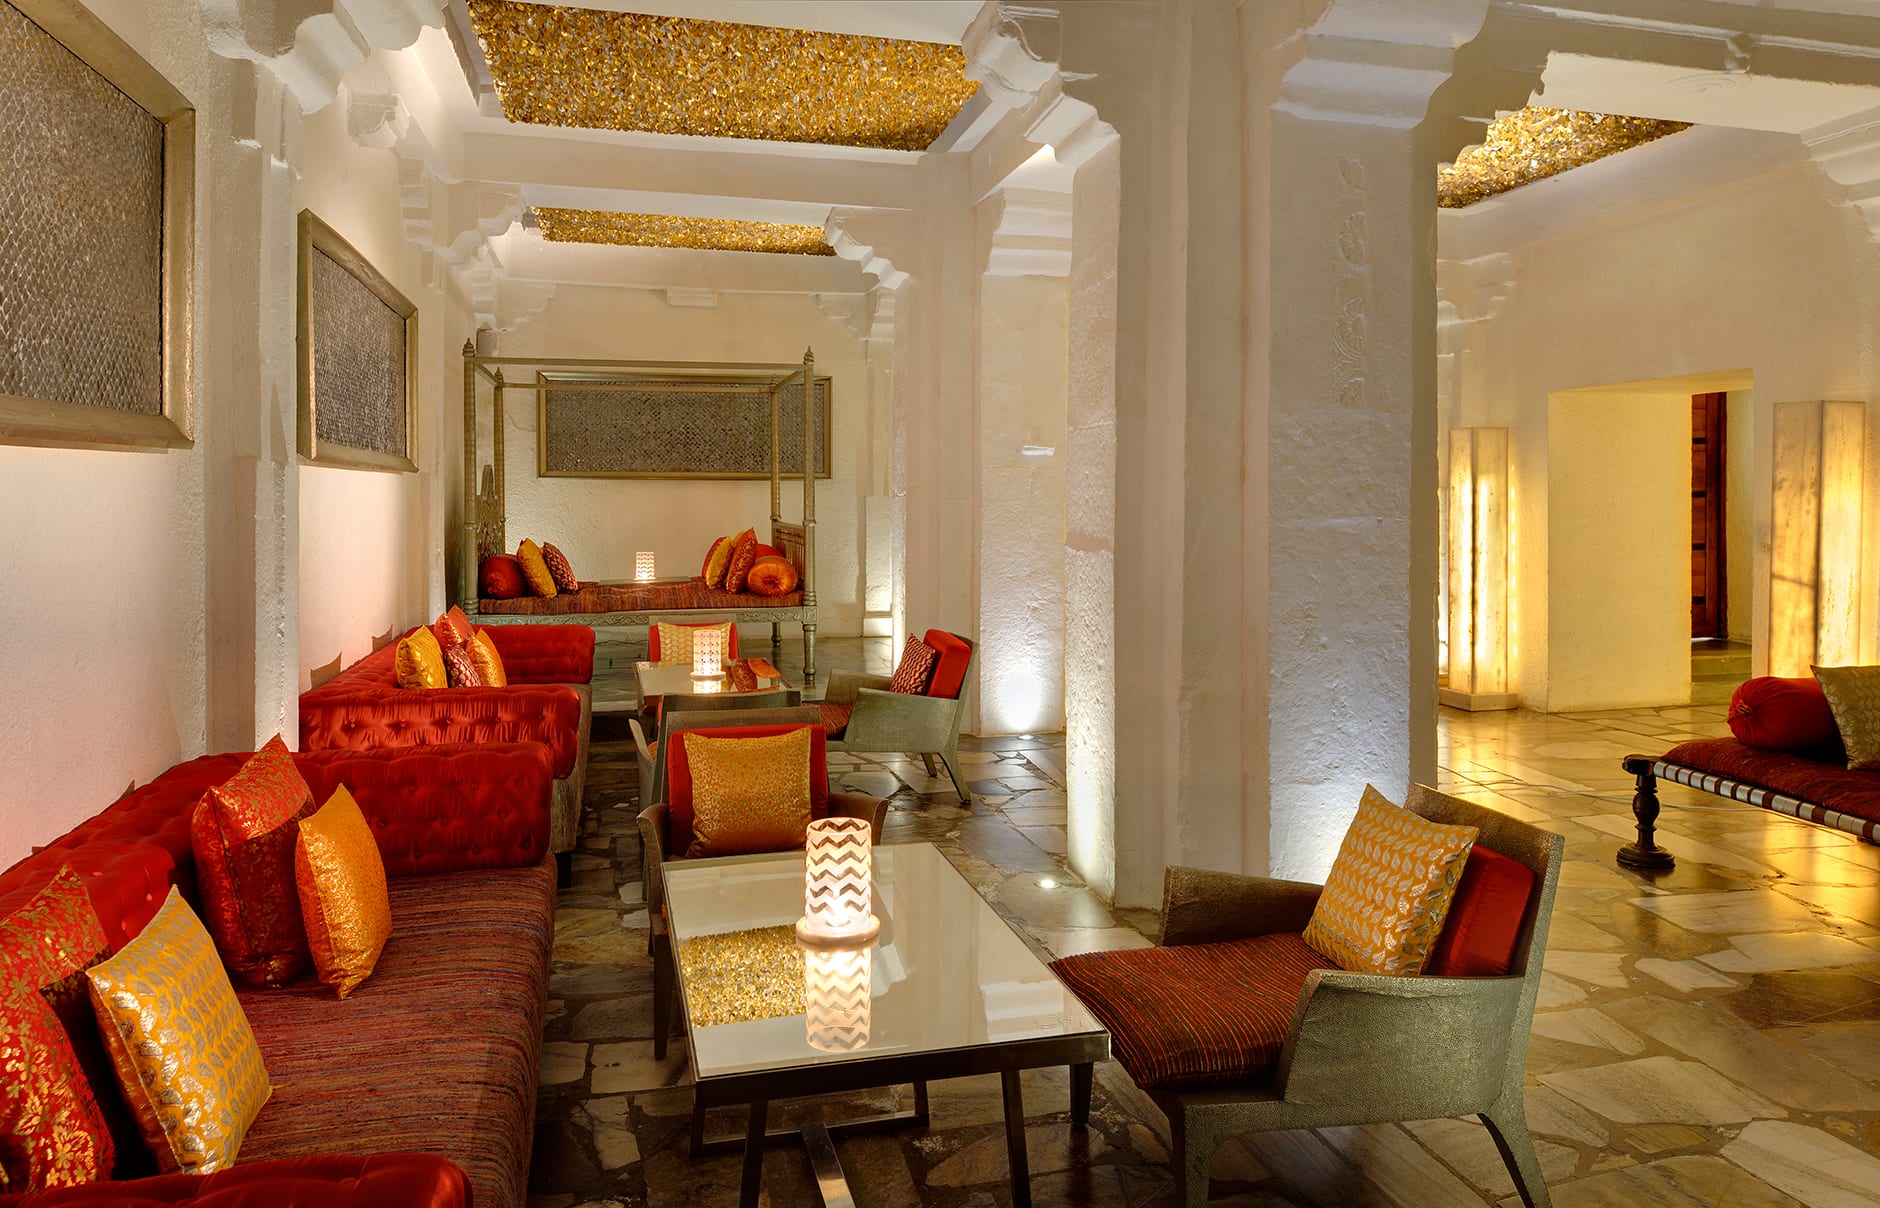 RAAS Devigarh, Udaipur, India. Hotel Review by TravelPlusStyle. Photo © RAAS Hotels